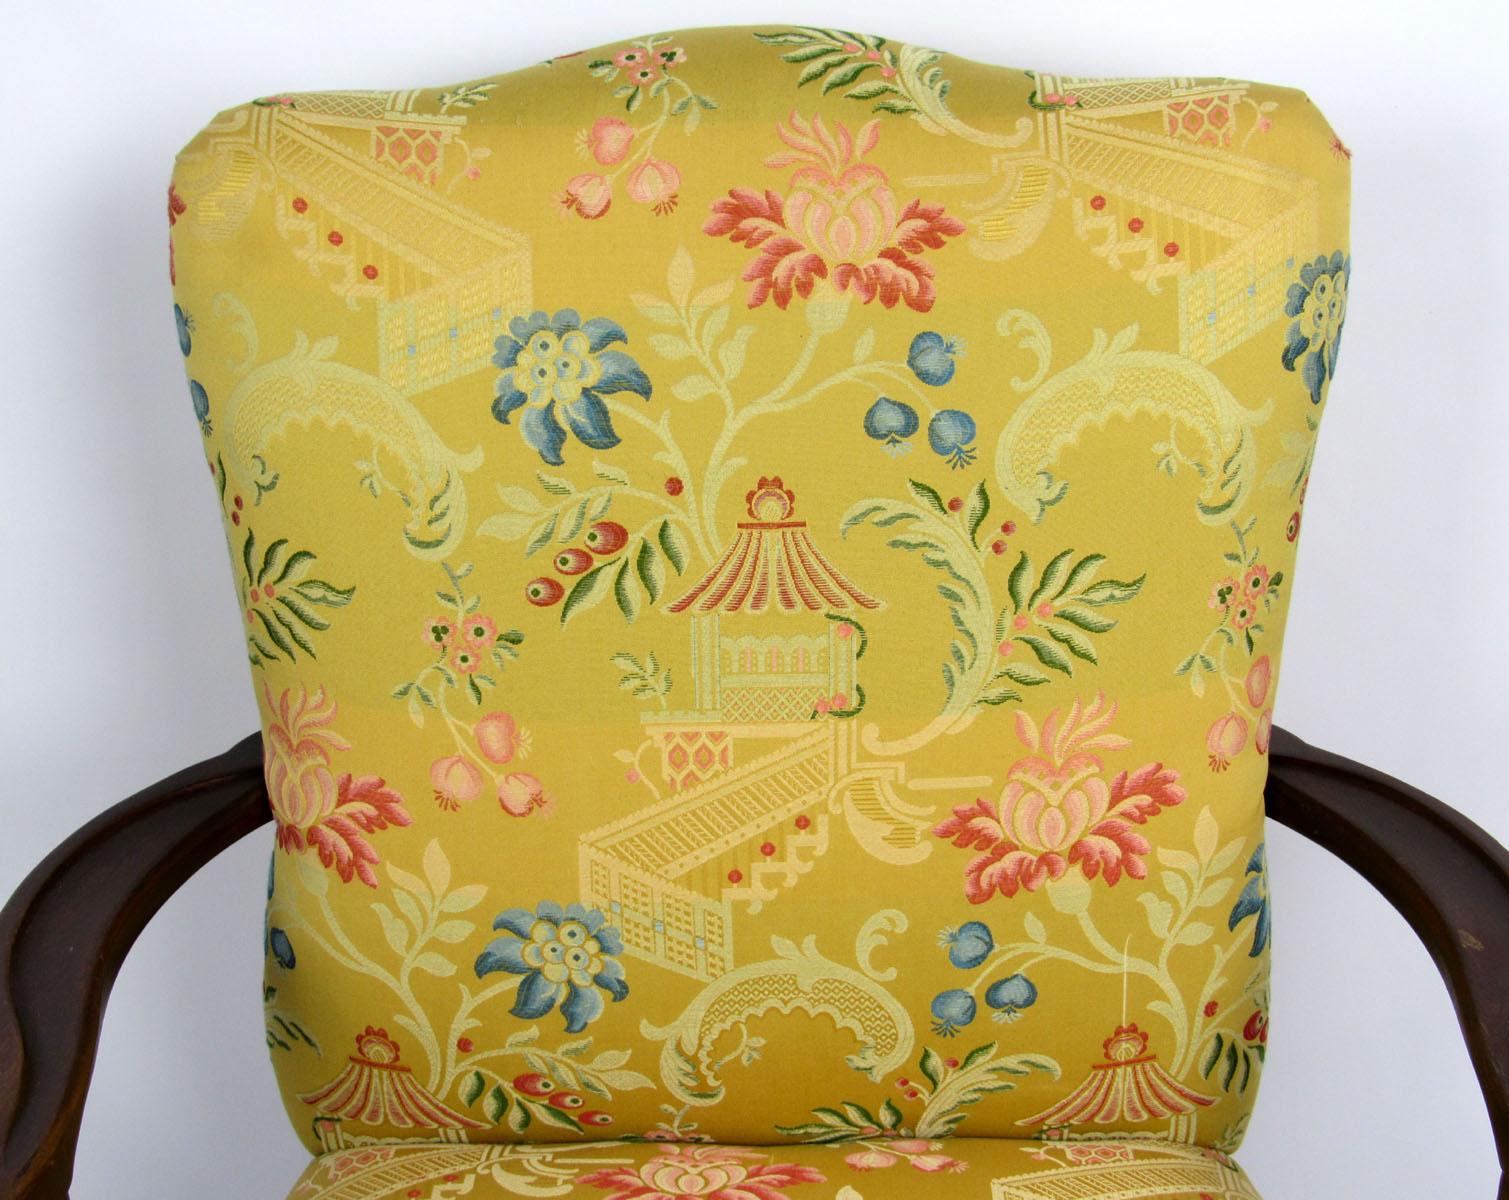 Single armchair with curved and scrolled mahogany arms and legs, upholstered in an oriental style fabric of yellow with pink, blue, and green floral detail.